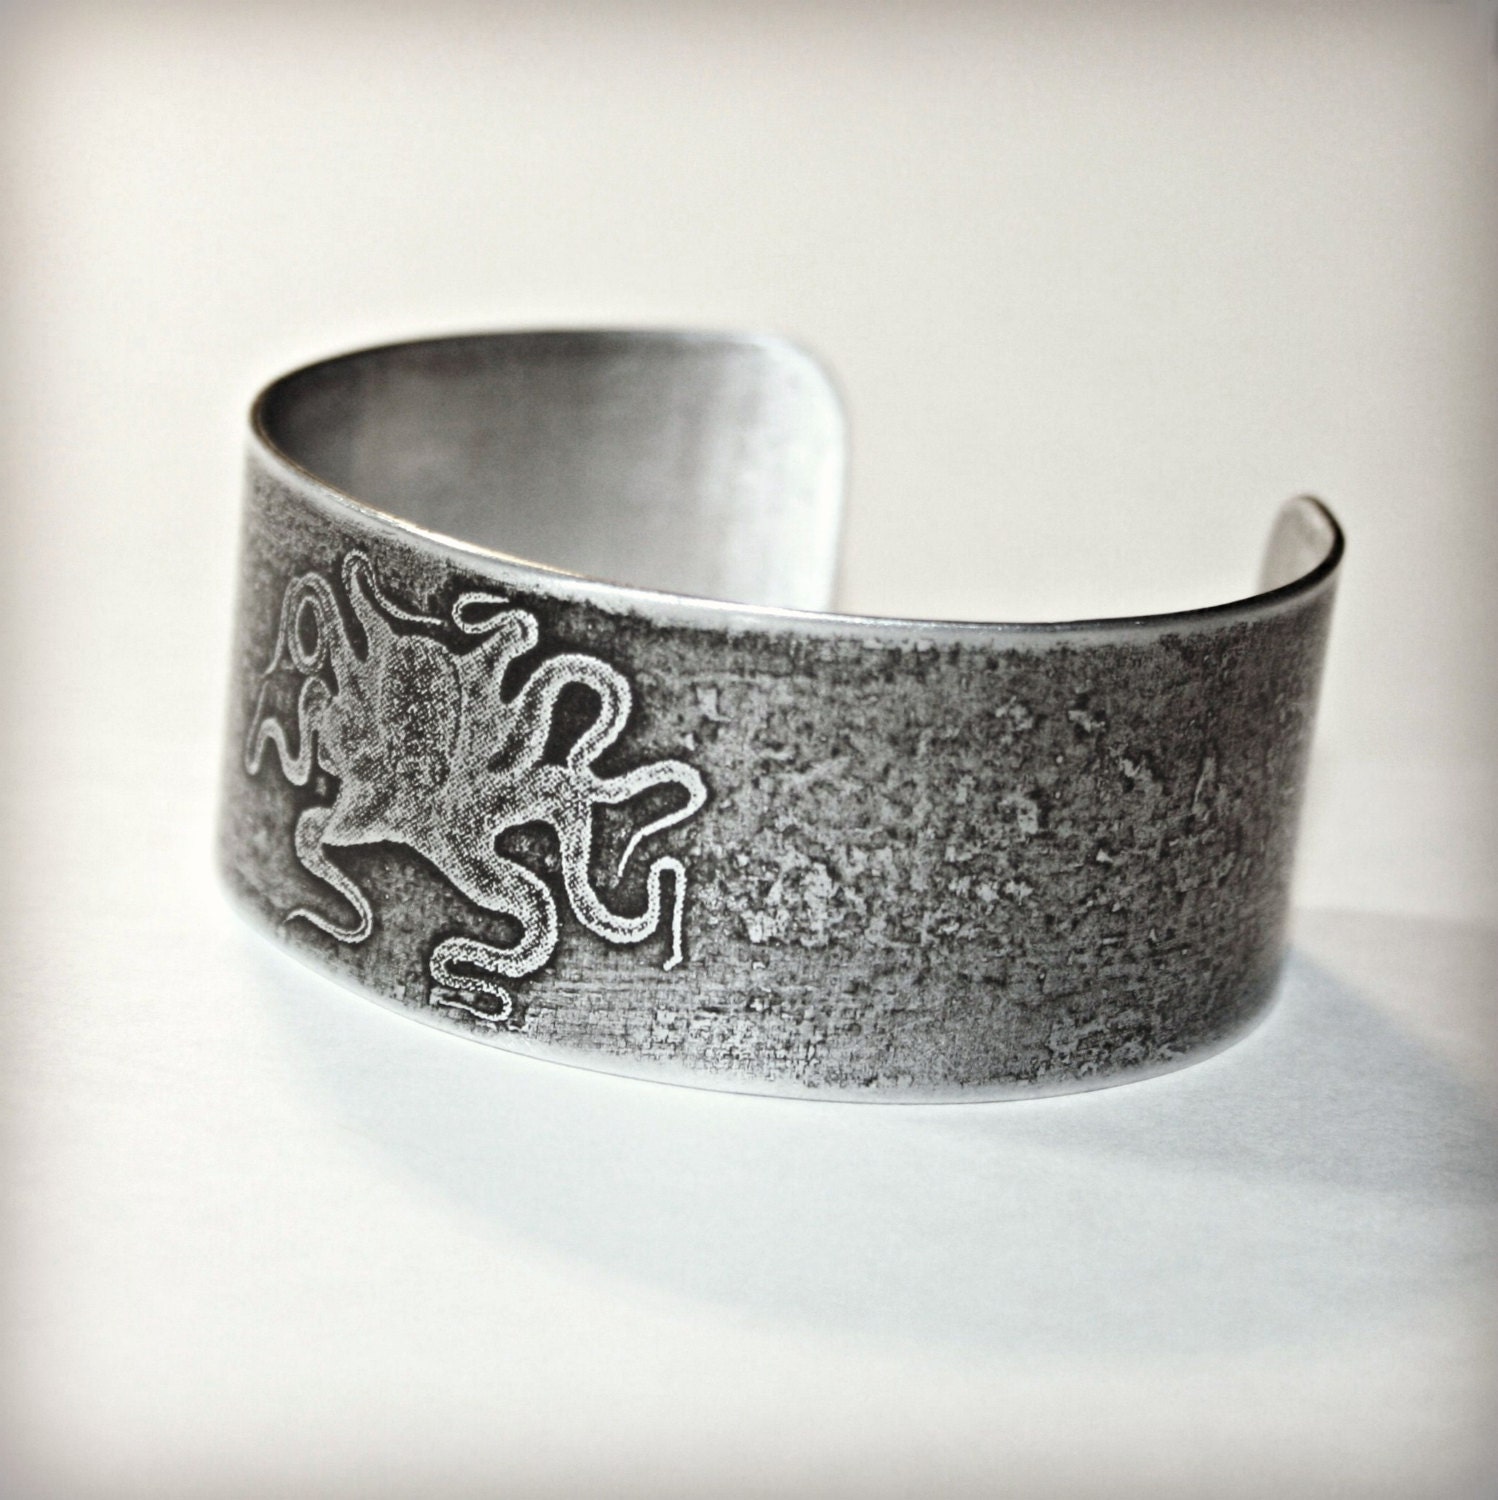 Aluminum Cuff Bracelet - Etched with Squid / Octopus Design - Can Be Personalized - hardweardesigns